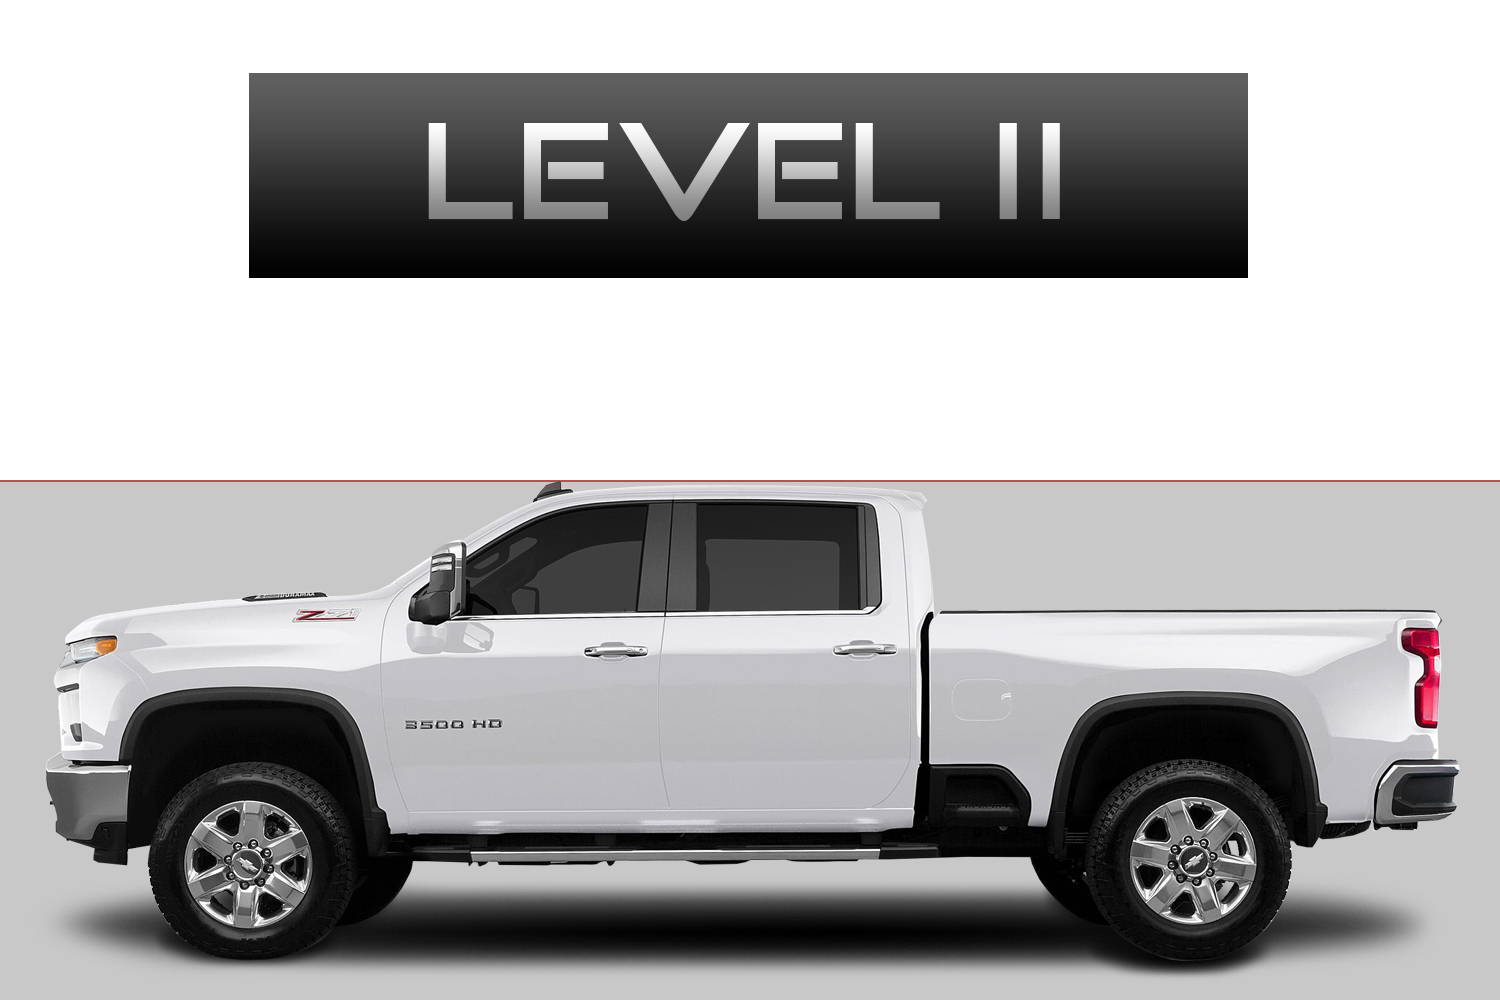 Chevrolet Silverado 2500 Off-Road Customizing Package Level 2 by 3C Trucks